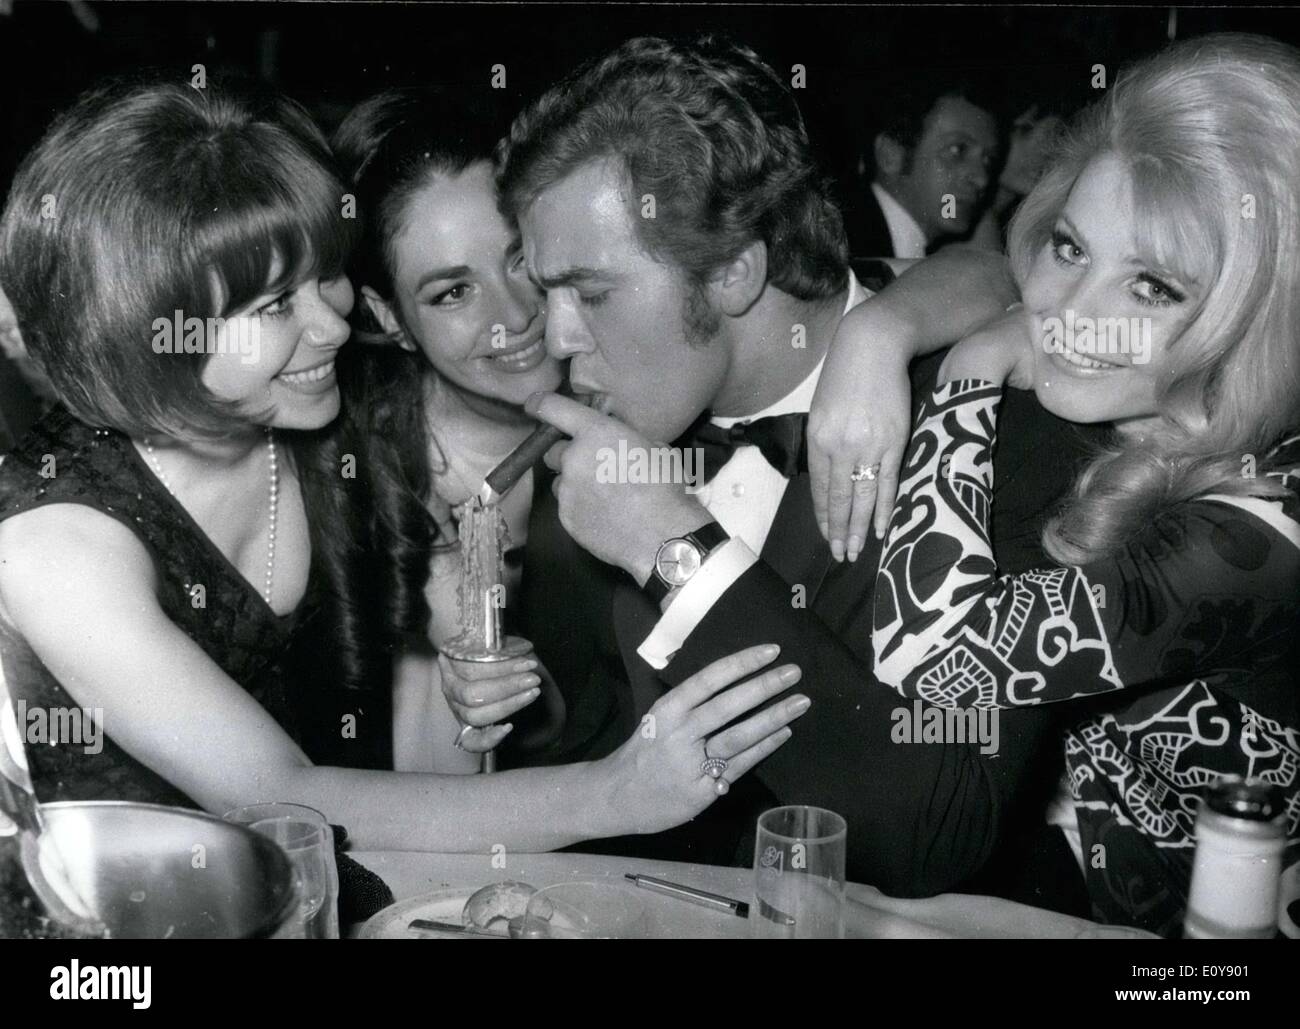 Feb. 03, 1969 - Like a rooster in a cage, the ''unlucky devil'' from Mexico, Olympic participant and actor Uwe Beyer is surrounded by charming film and television actresses, in the Mainz Rheingold hall. Kai Fischer, Karin Dor, and Maria Brockerhoff(from left to right) insist on lighting the cigar to symbolically ''encourage'' the film and athletic heroes. Stock Photo